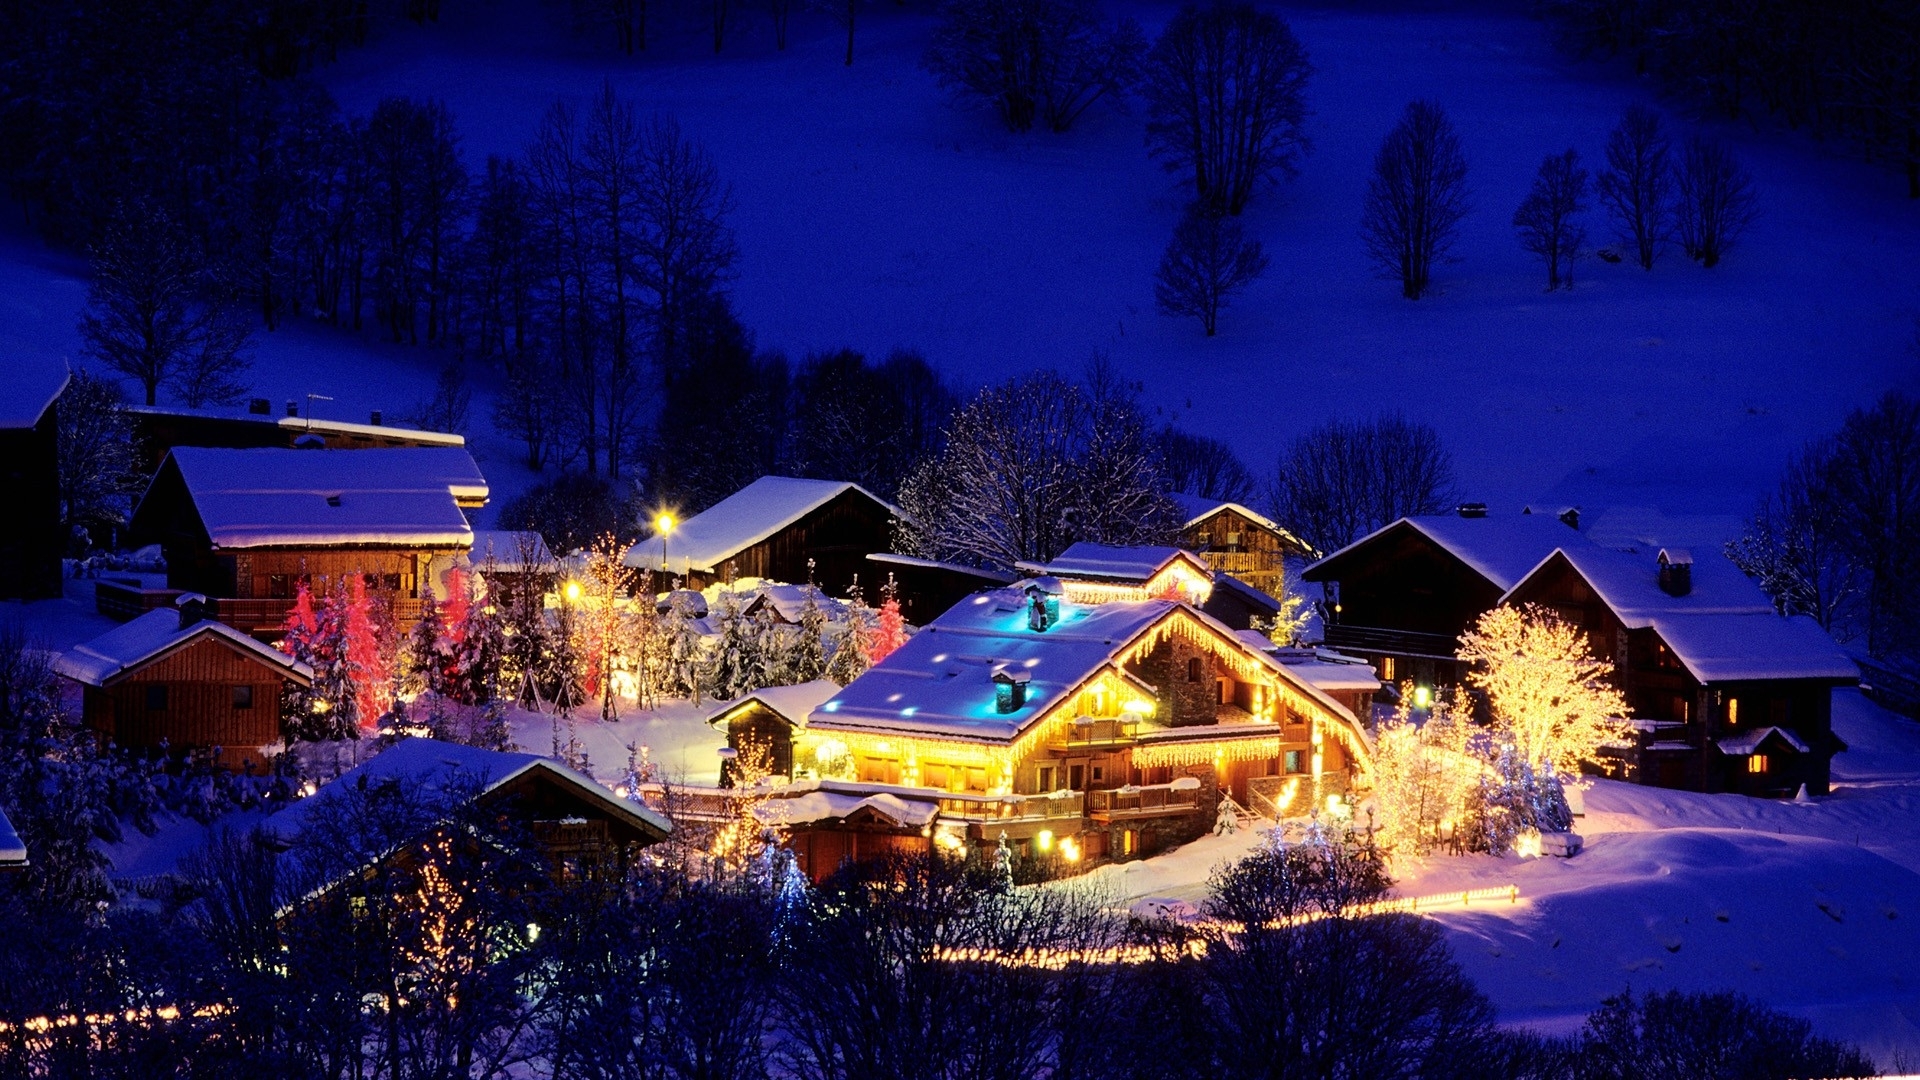 france, Holidays, Christmas, Night, Lights, Festive, Winter, Snow, Architecture, Building, House, Mountains, Hill, Trees, Place Wallpaper